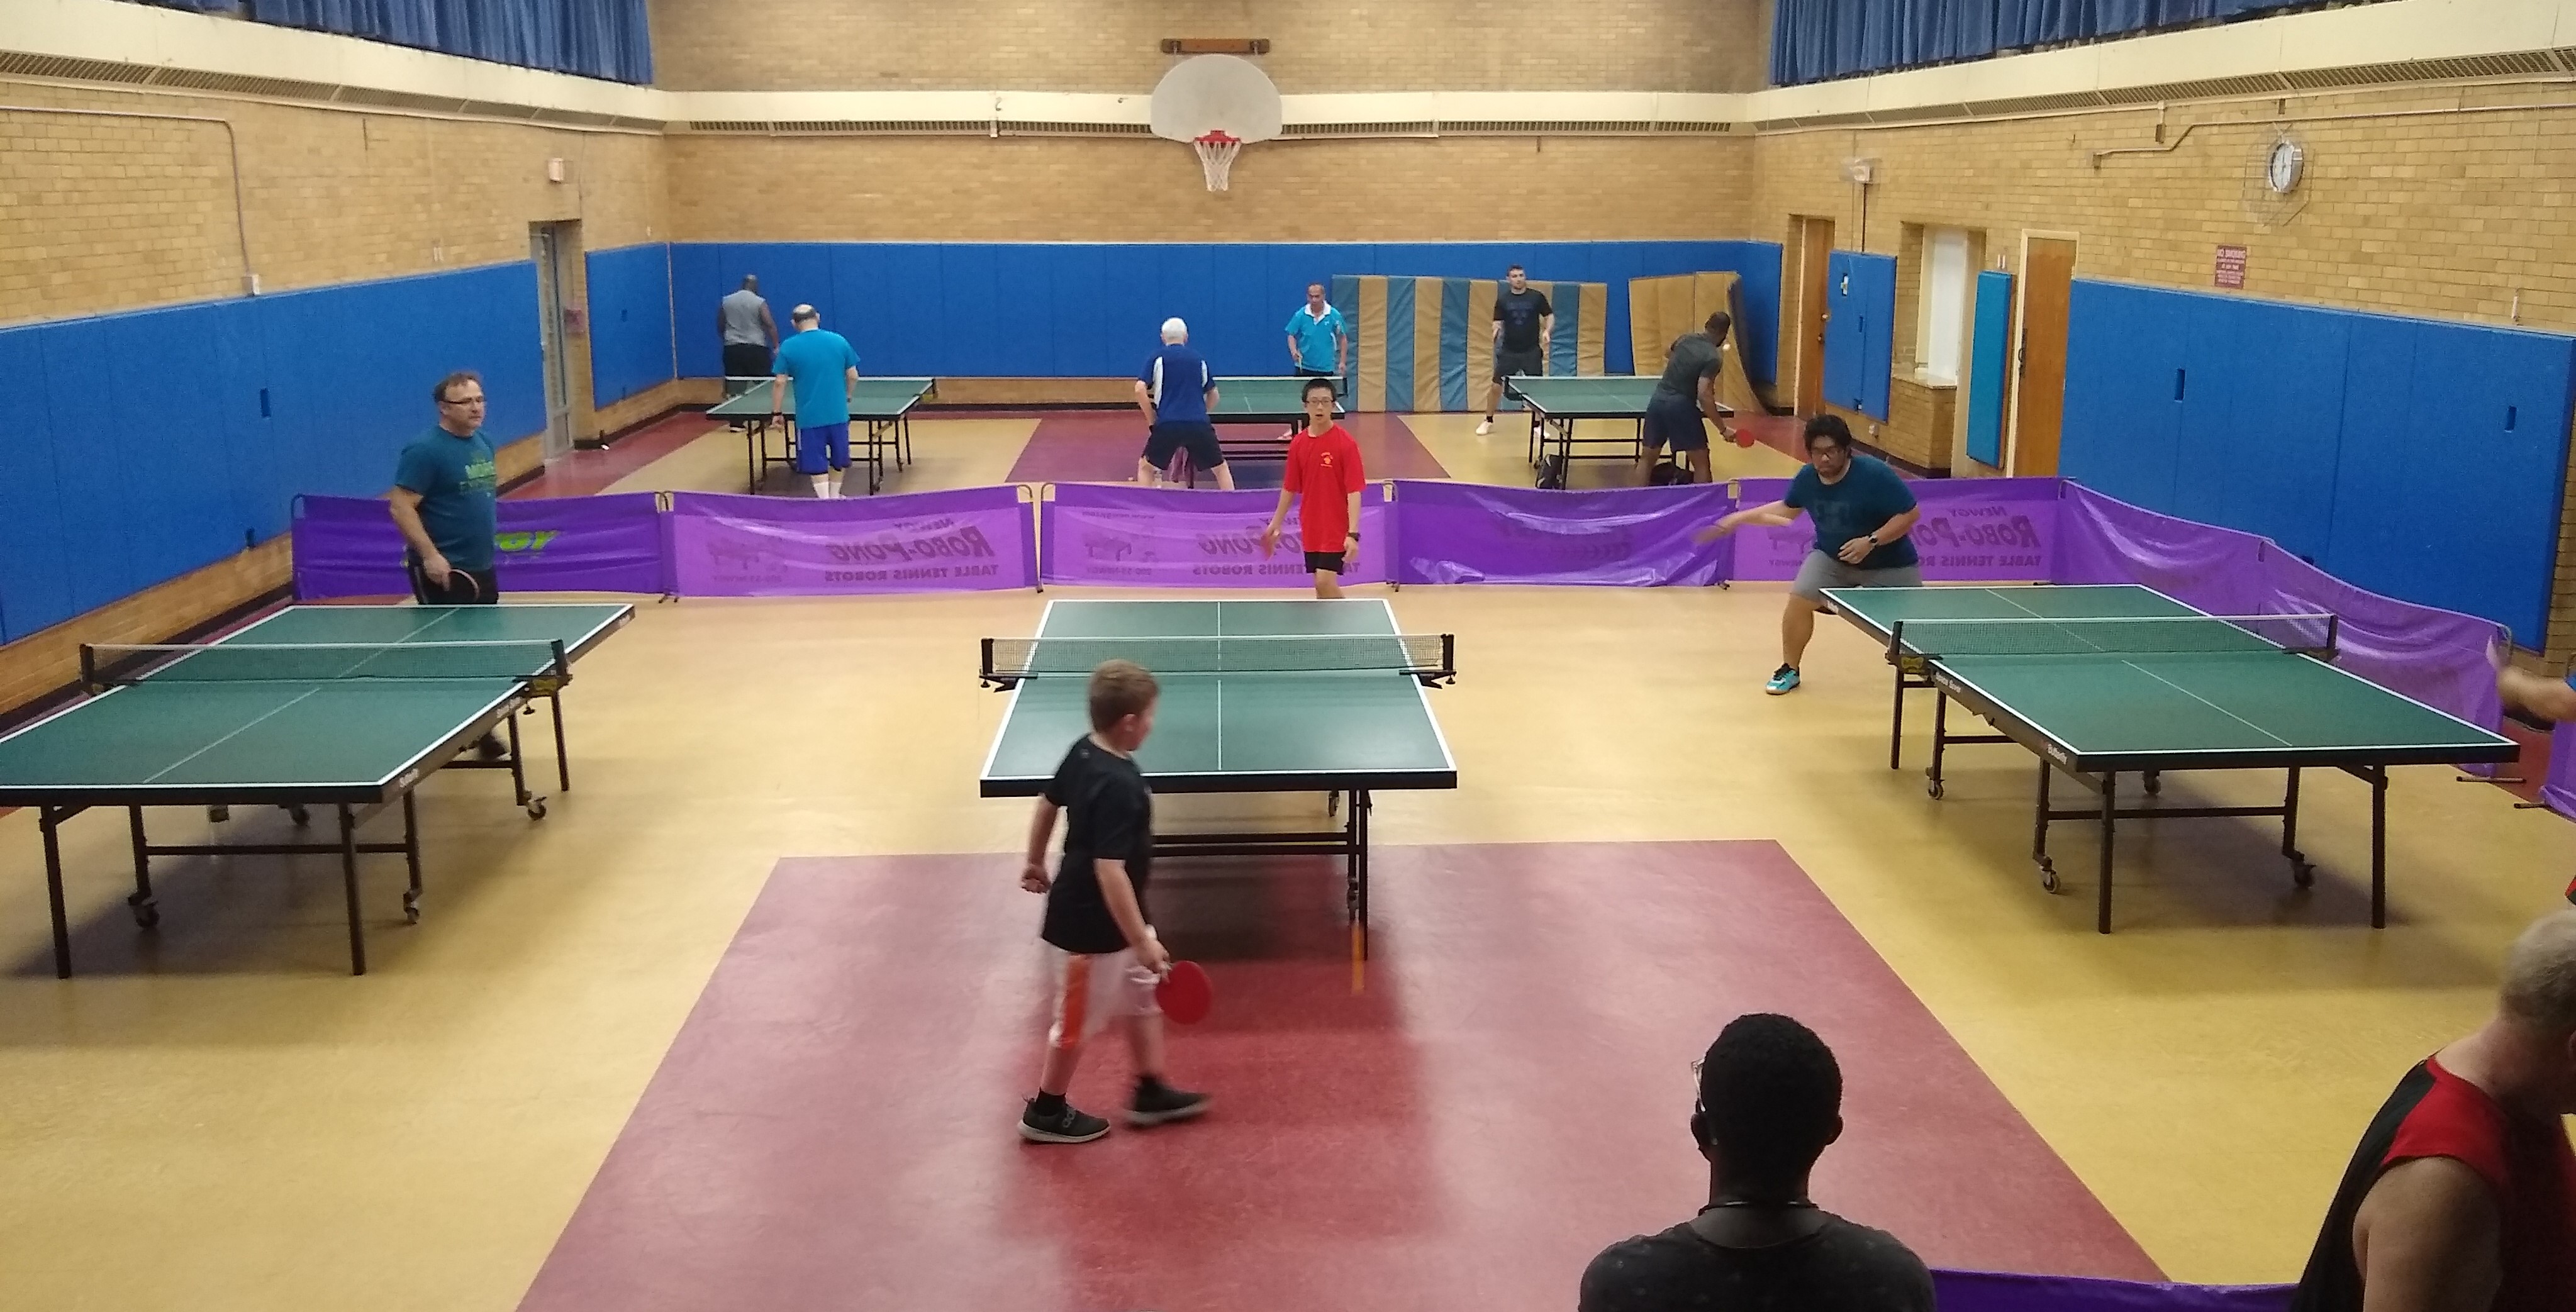 Alexandra Table Tennis Club - Club Practice Venue - We are a friendly Table  Tennis Club for people over 14 in Tolworth, Surbiton - with Monday club  nights.